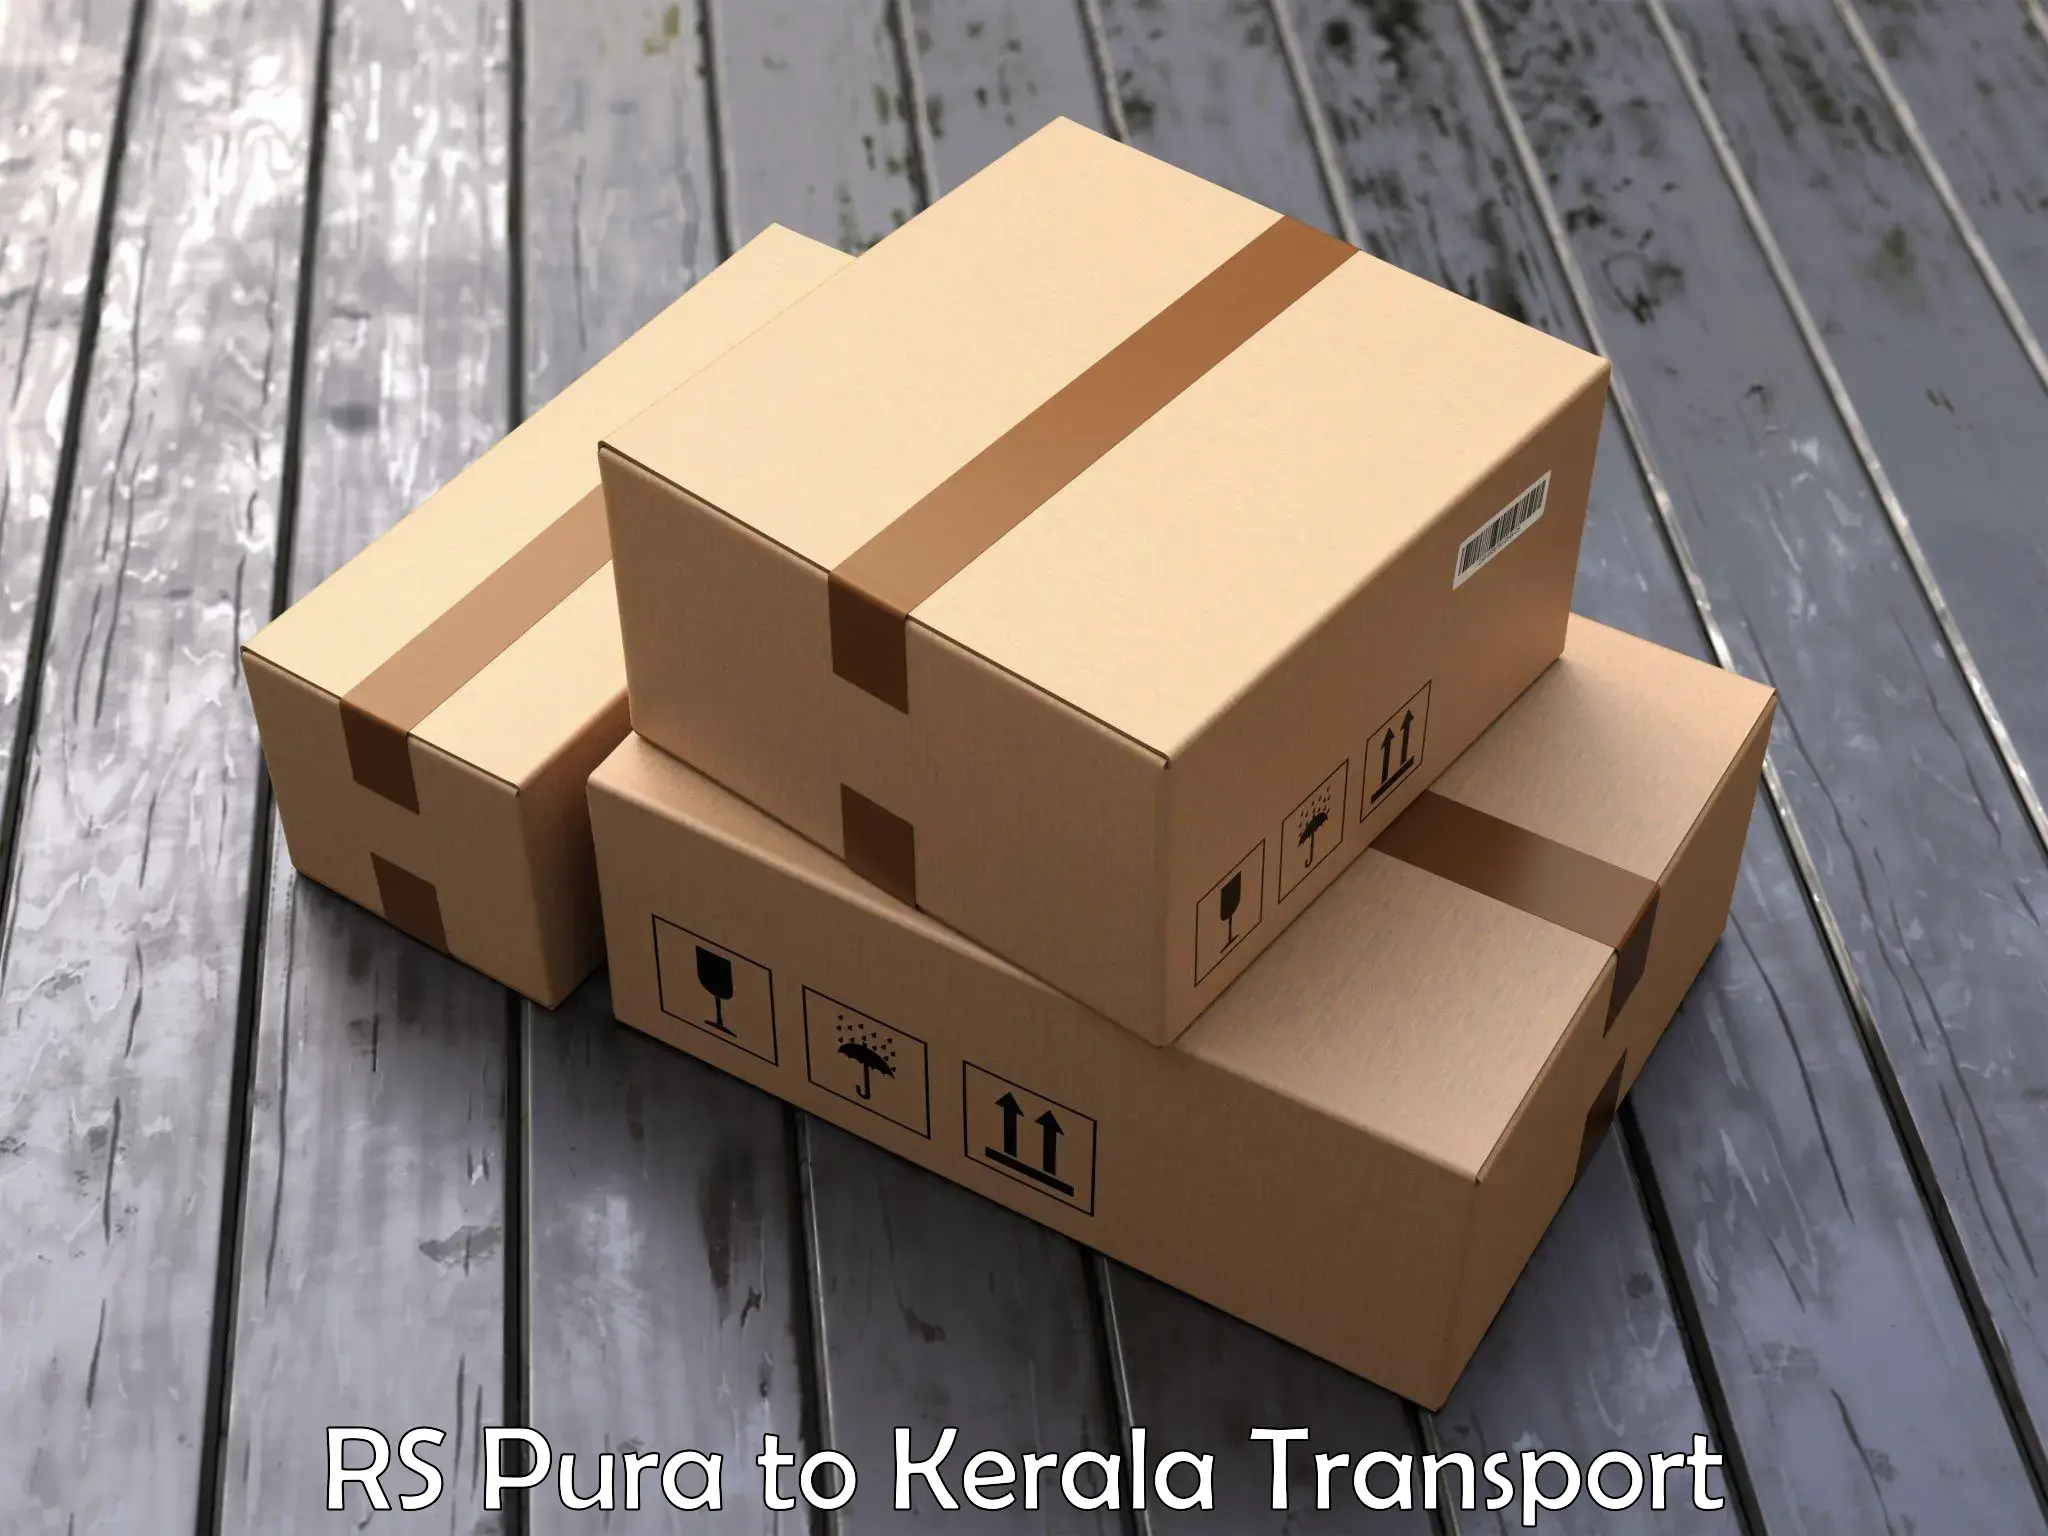 Parcel transport services RS Pura to Anjumoorthy